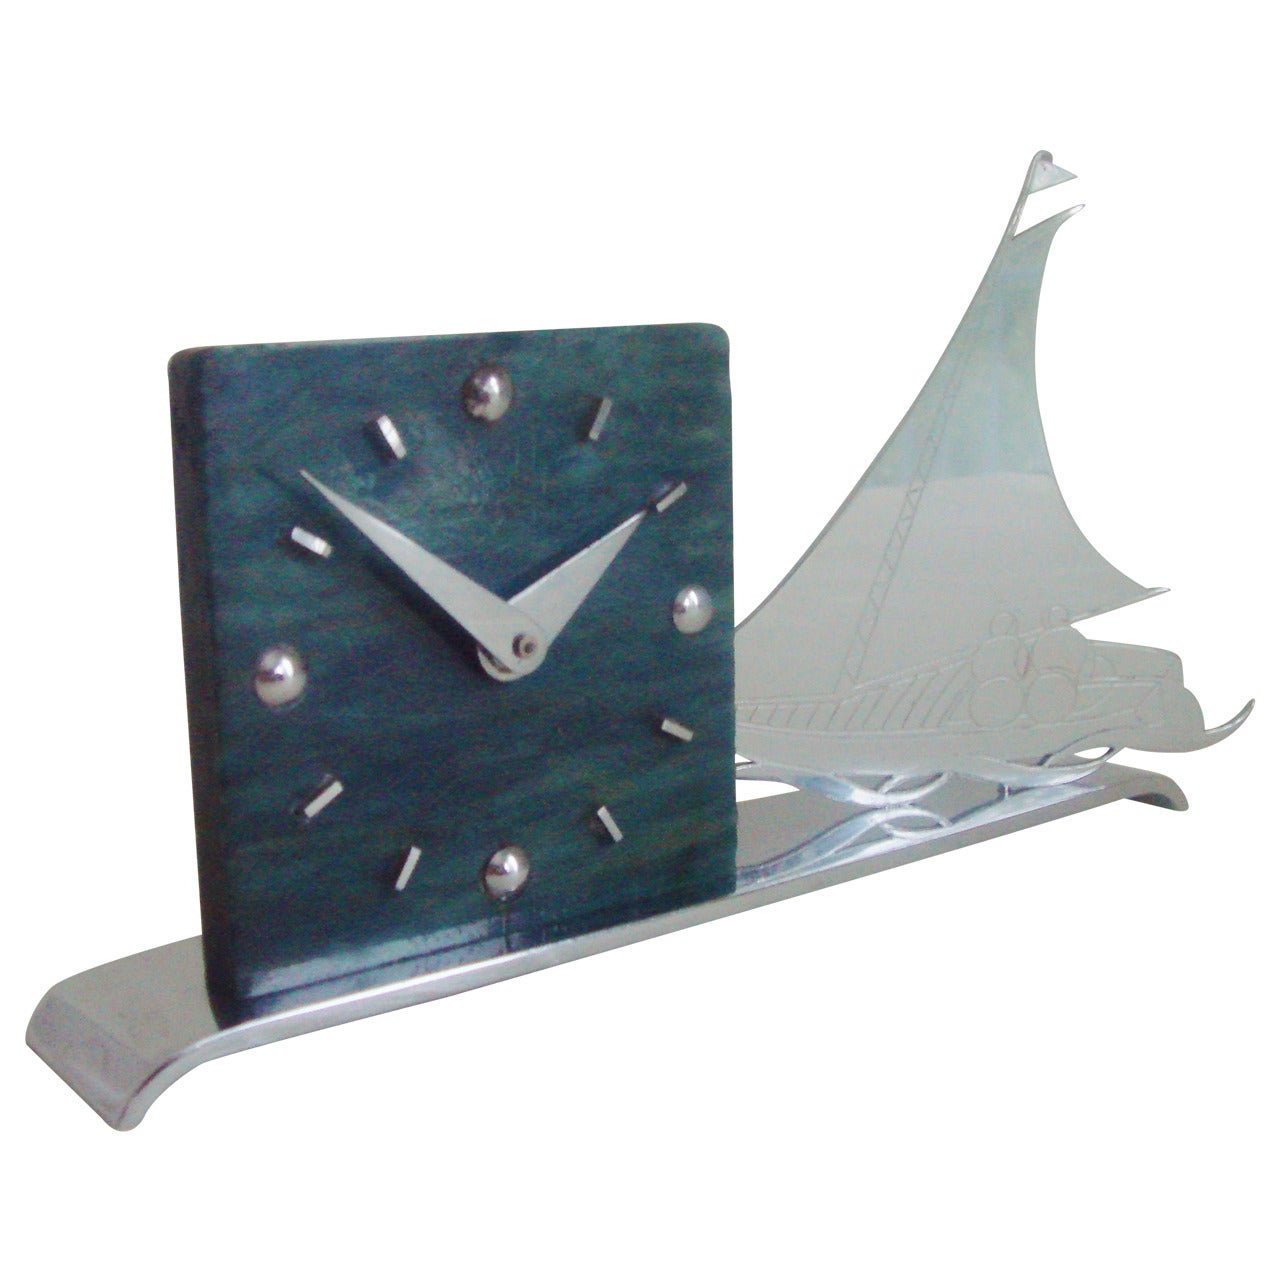 French Art Deco Figurative Marbled Galalith & Chrome Racing Yacht Shelf Clock. For Sale